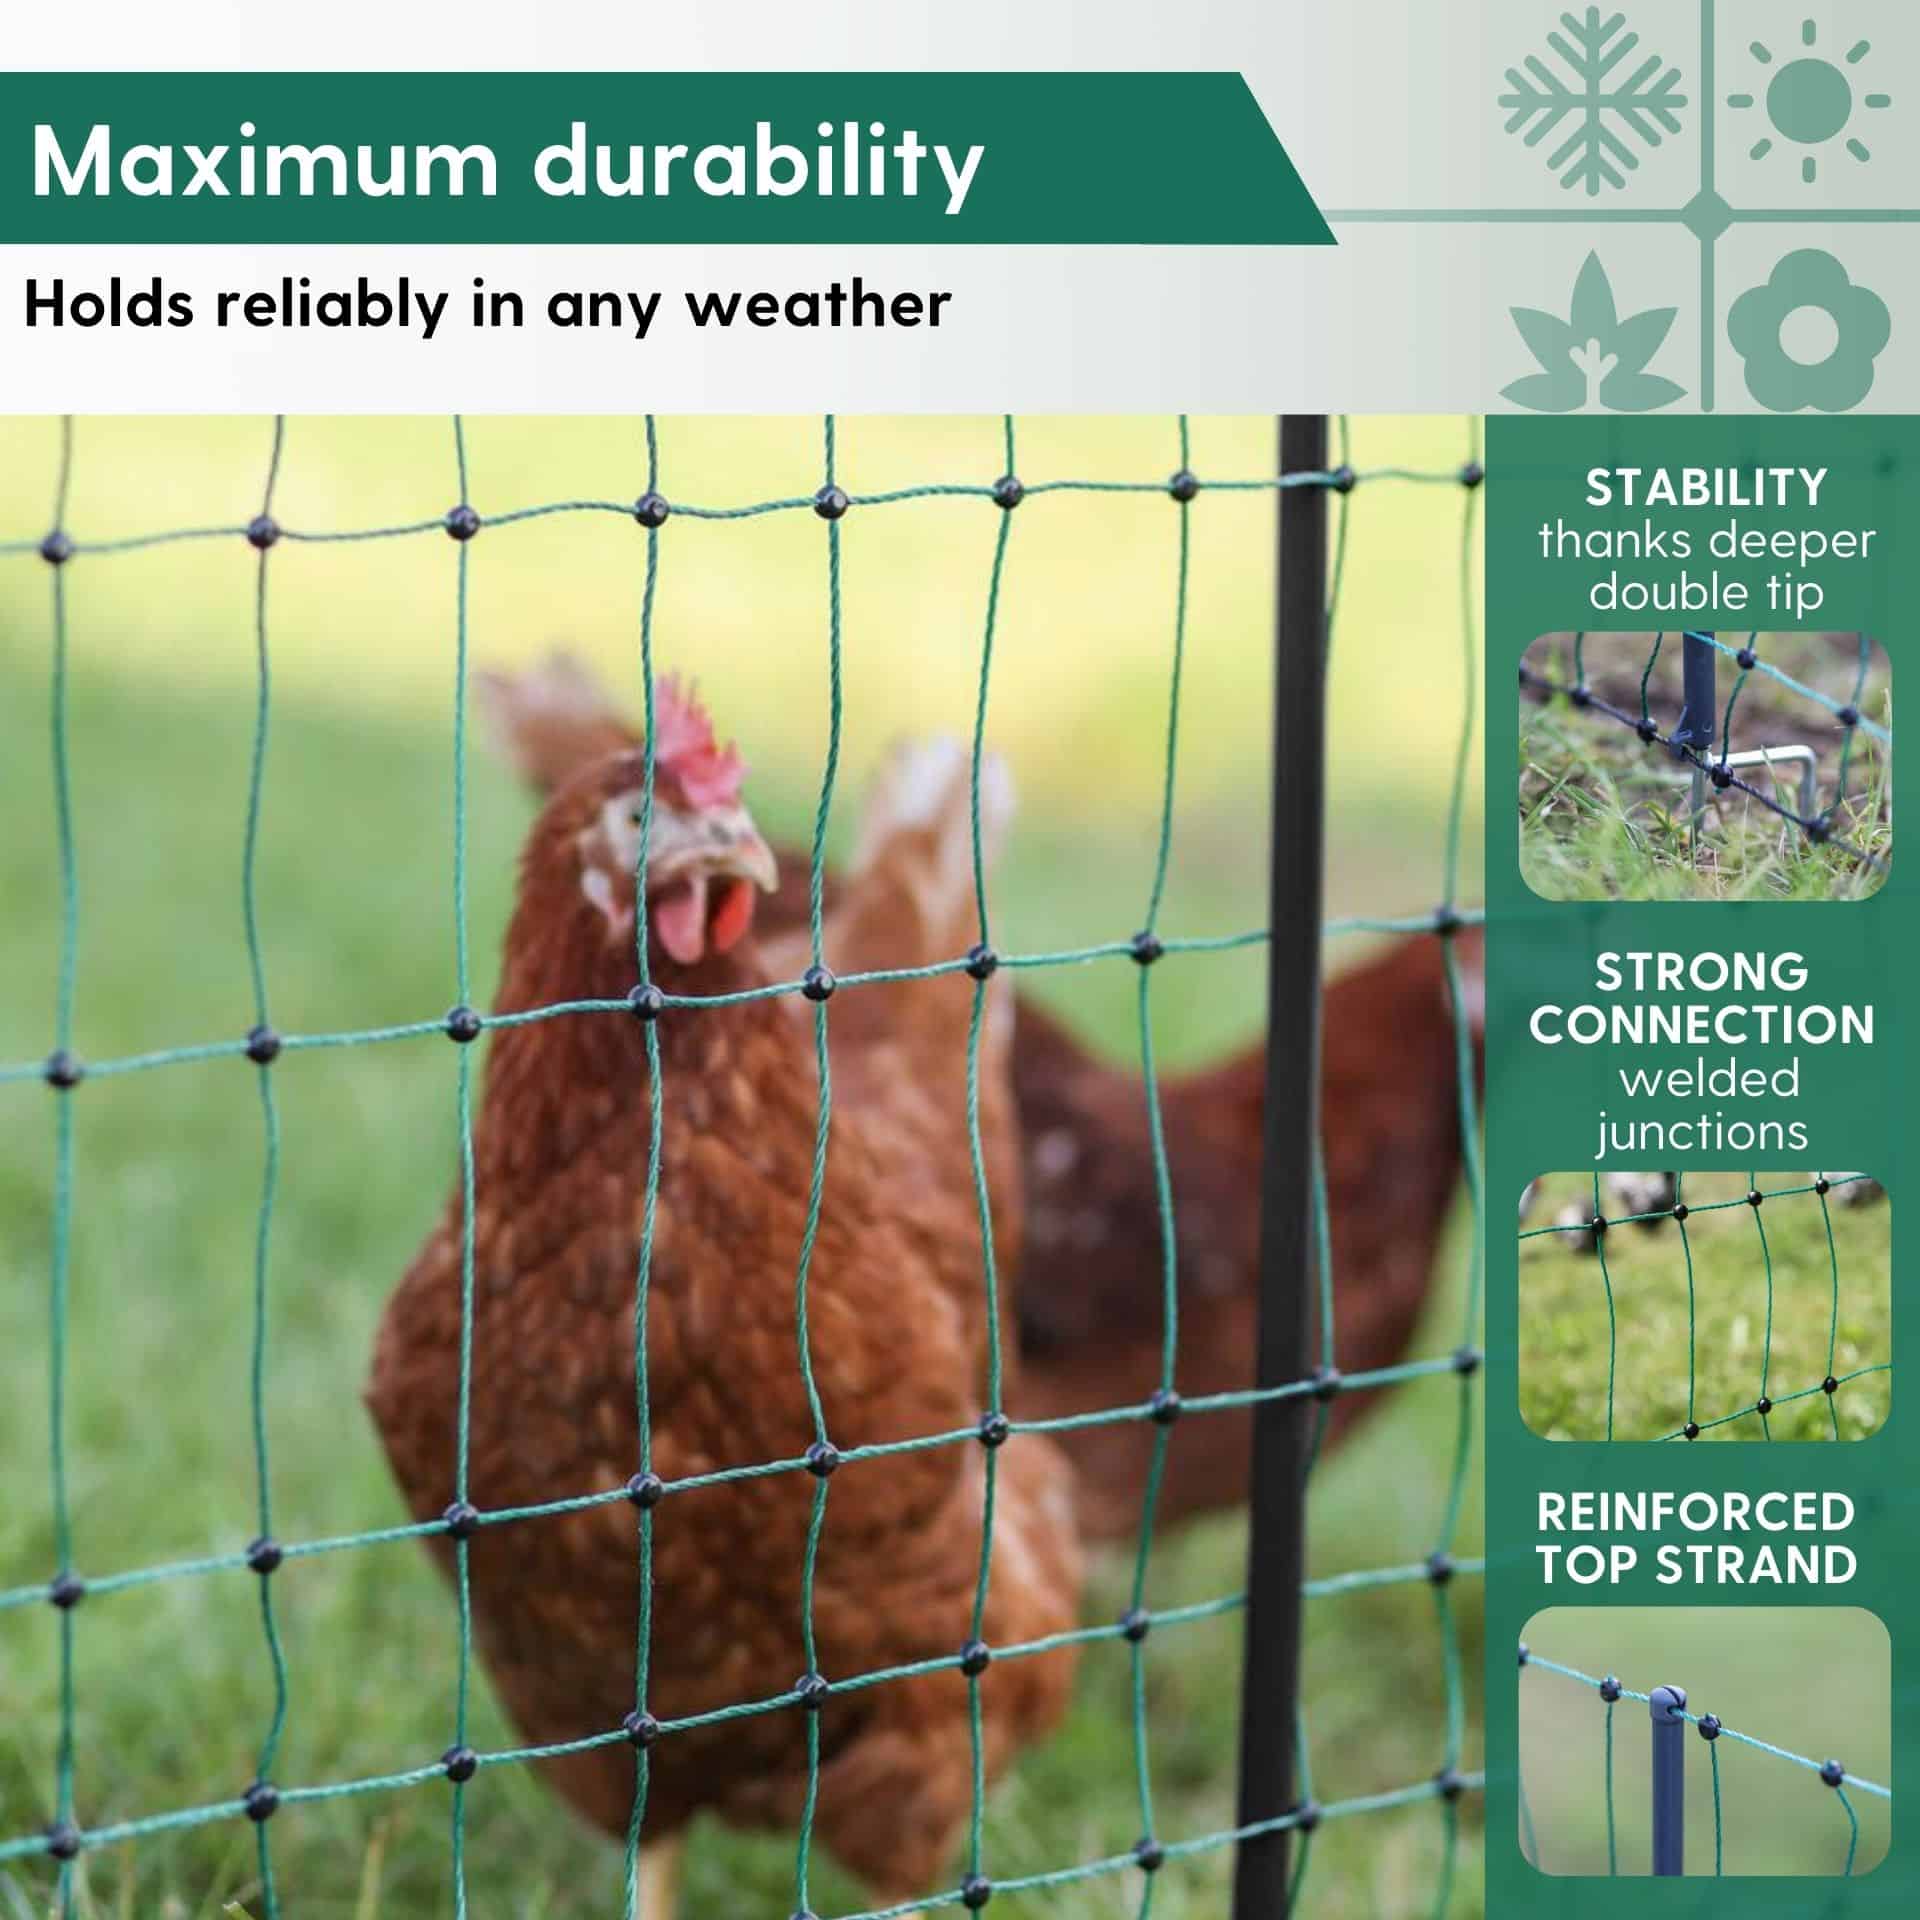 Agrarzone Poultry Net Classic electrificable, double tip, green 50 m x 112 cm